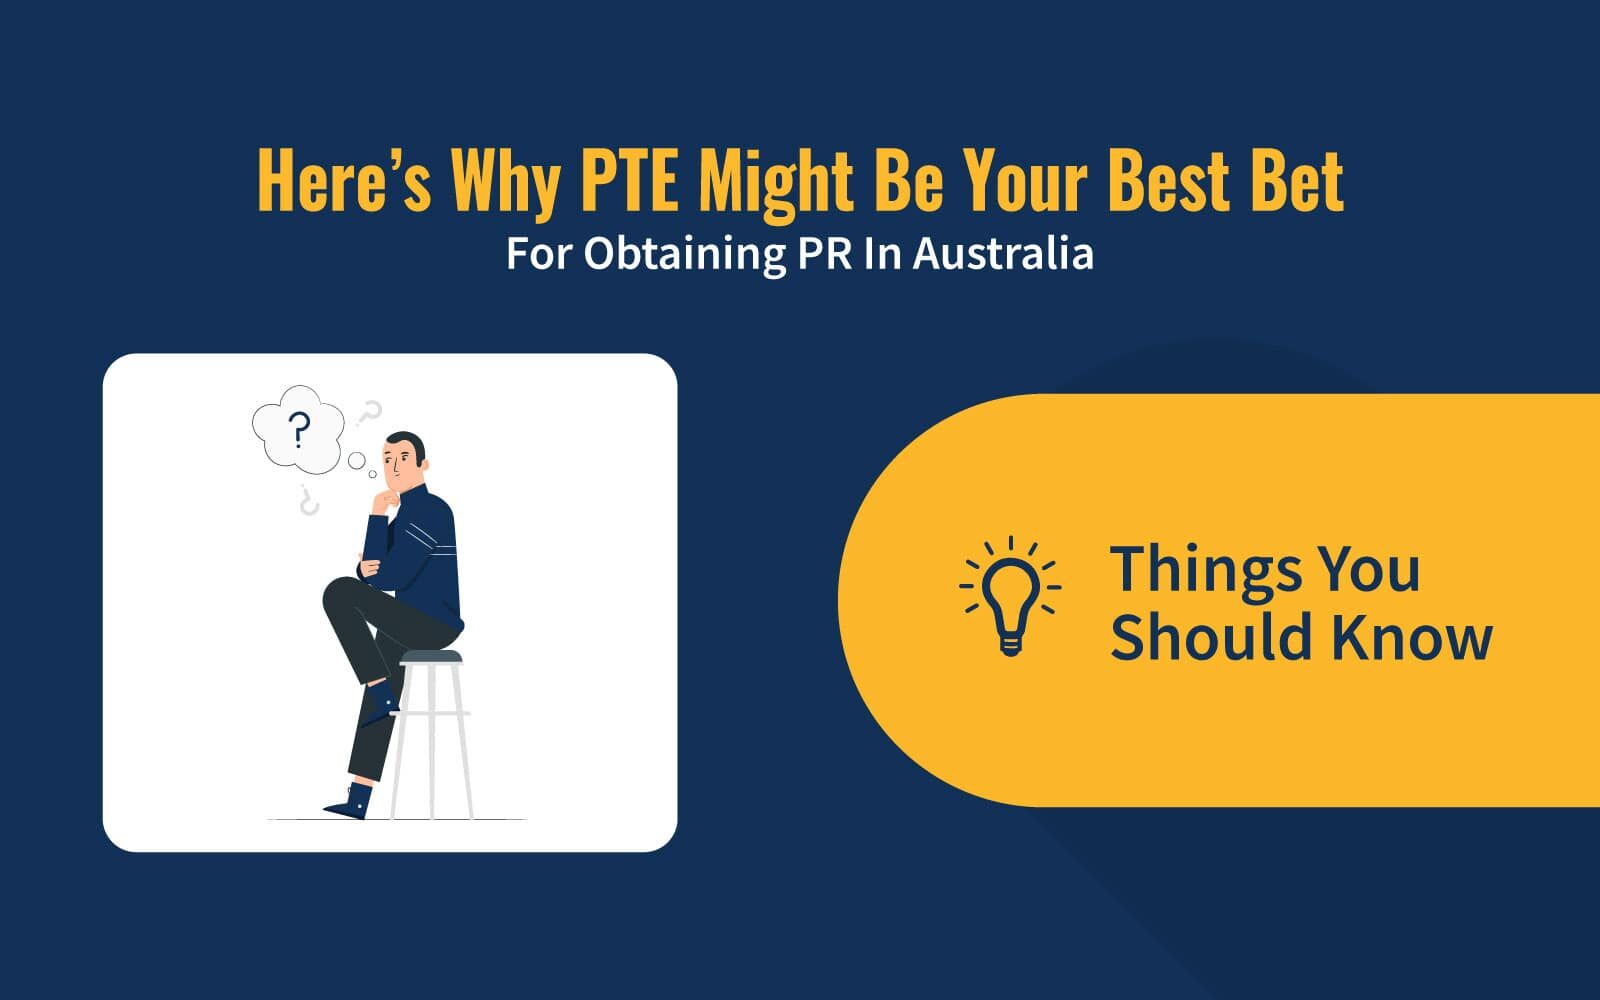 Here’s Why PTE Might Be Your Best Bet For Obtaining PR In Australia